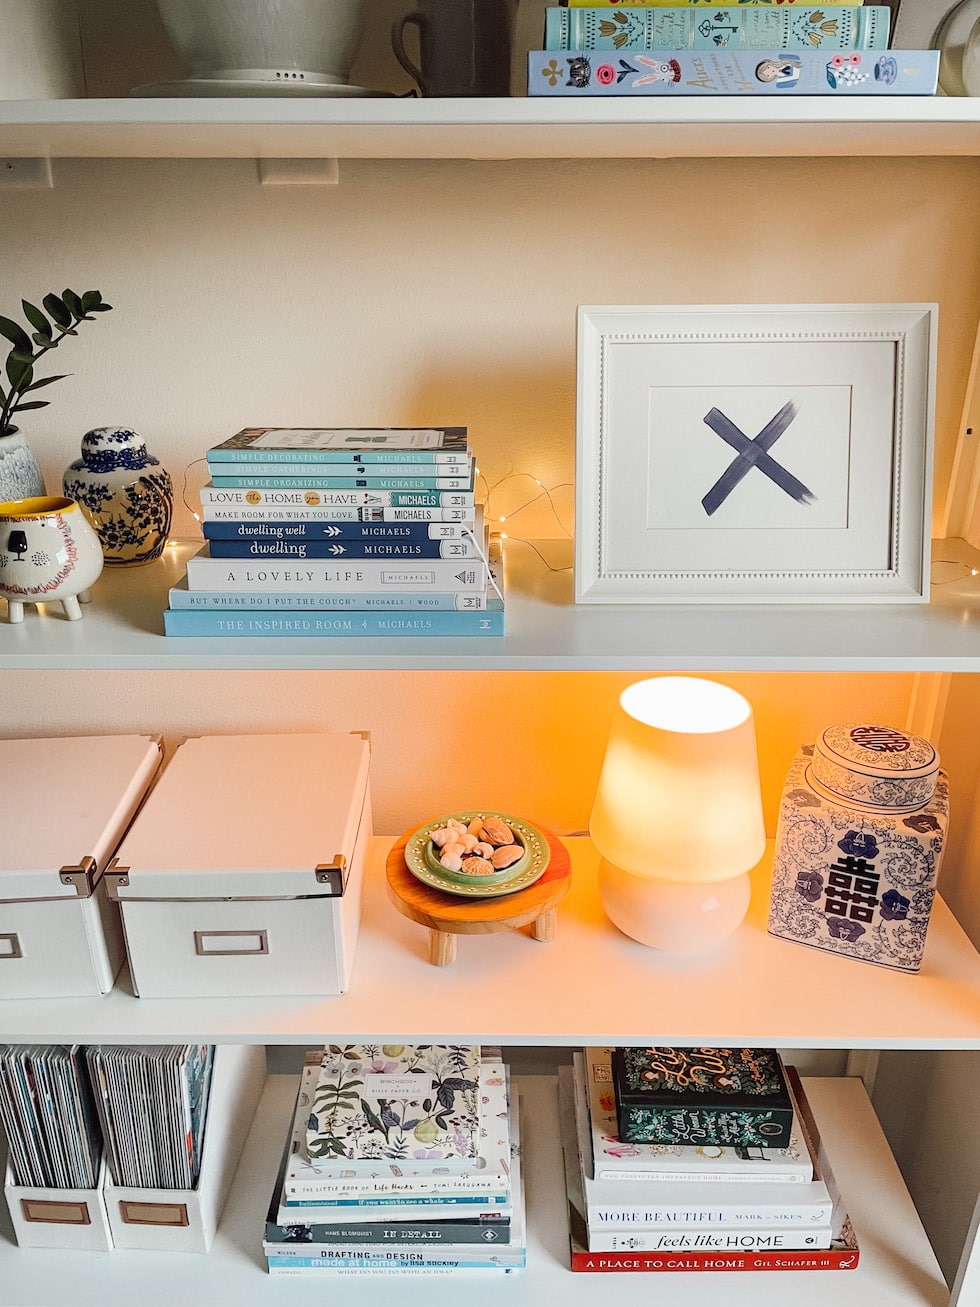 The Perfect Small Lamp for a Bookshelf or Countertop